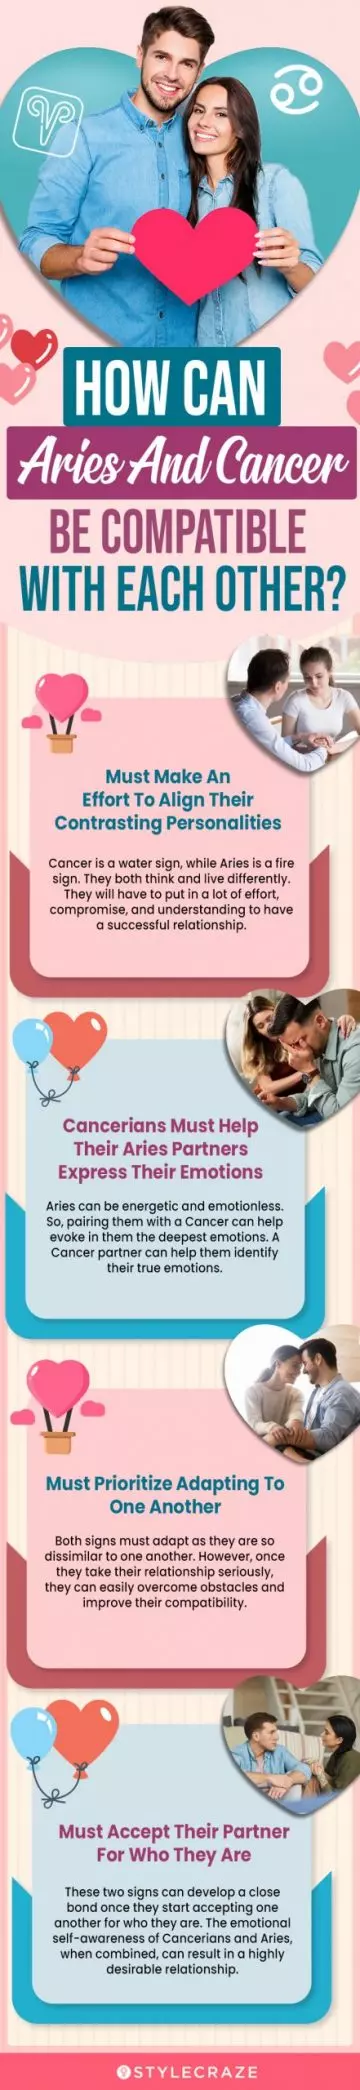 how can aries and cancer be compatible with each other (infographic)